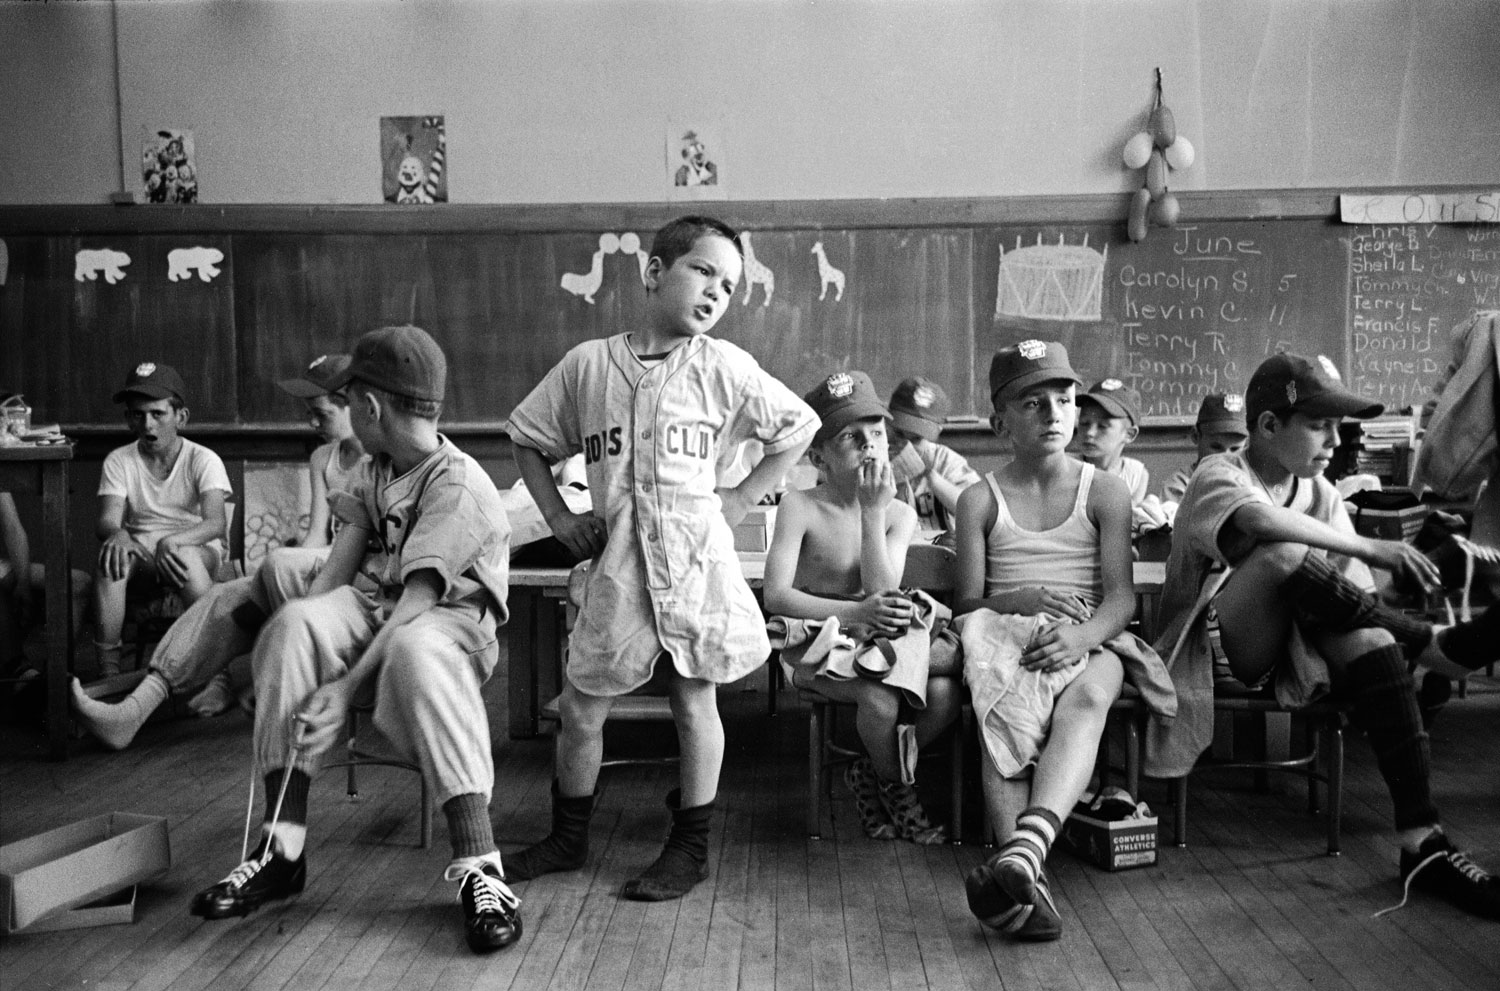 Little Leaguers (including their formidable leader, Dick Williams, center), await missing parts of their uniforms, Manchester, N.H., 1954.